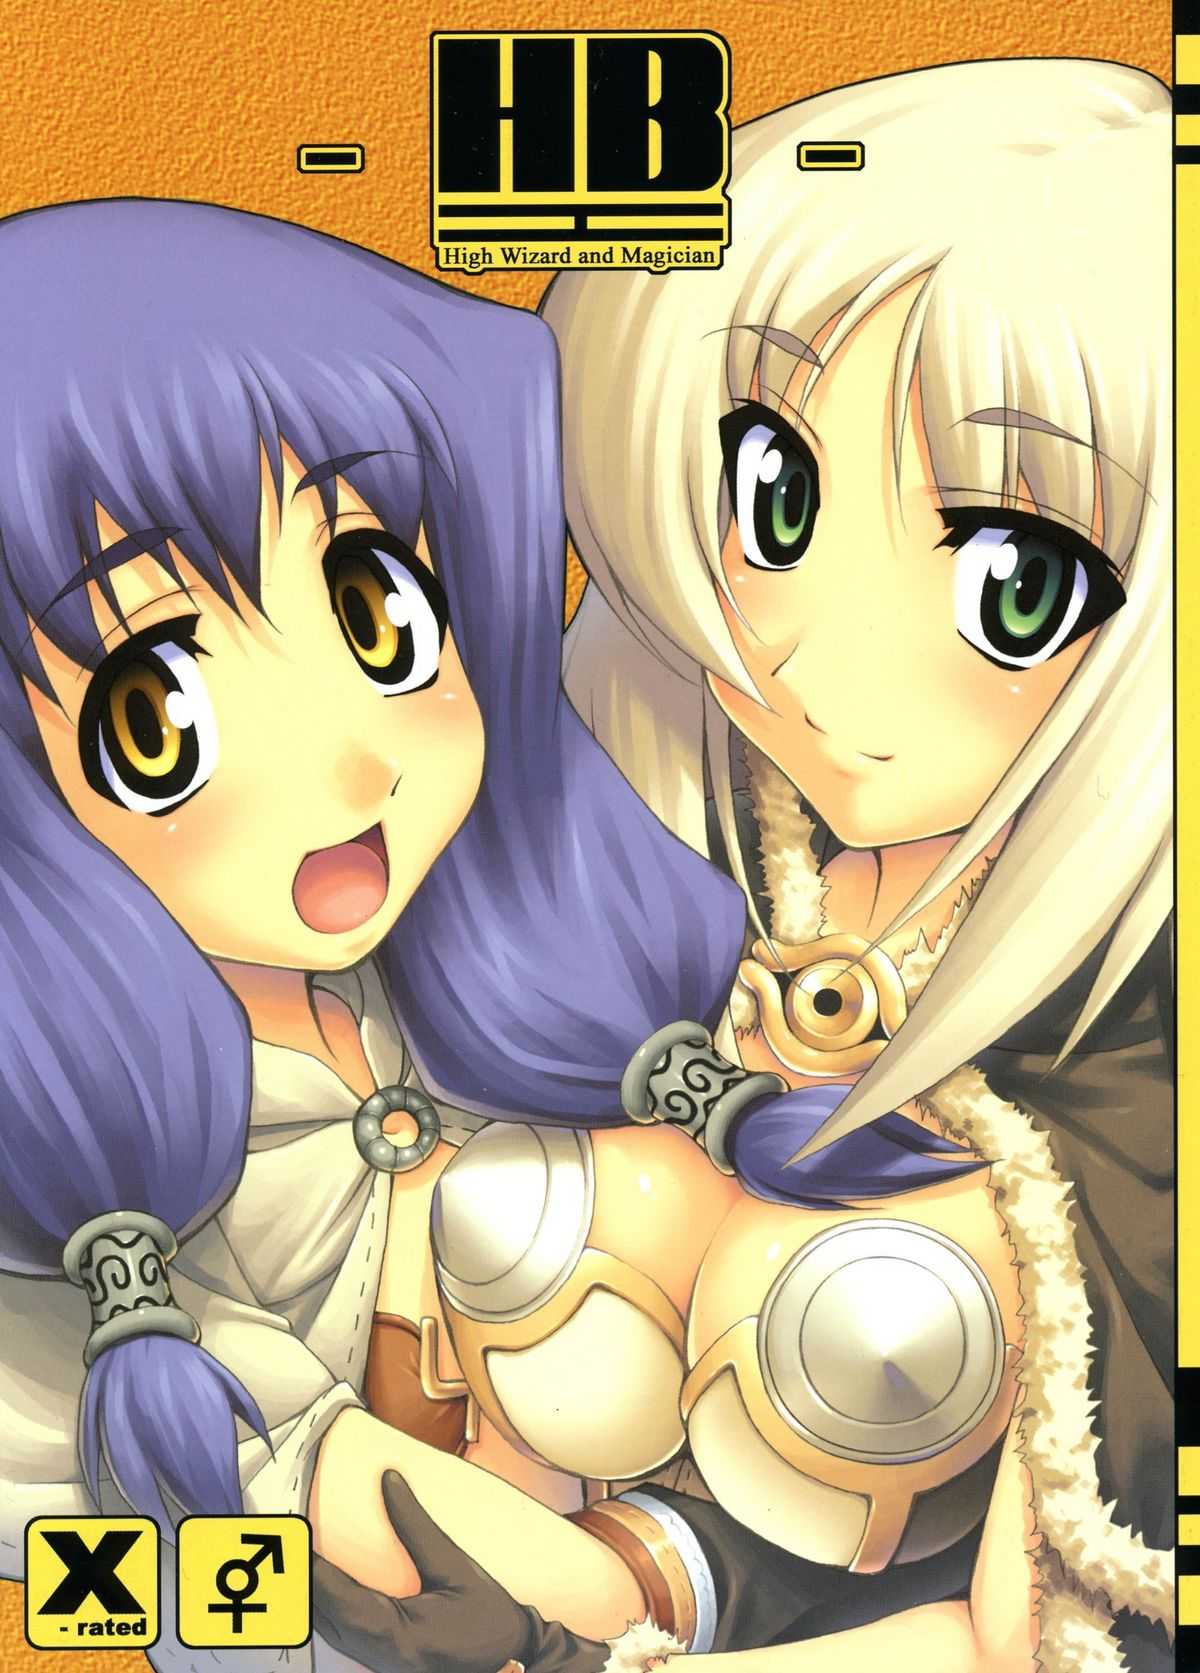 (C69) [Web Graveyard (Yn_red)] -HB- High Wizard and Magician (Ragnarok Online) (C69) [Web Graveyard (Yn_red)] -HB- High Wizard and Magician (ラグナロクオンライン)